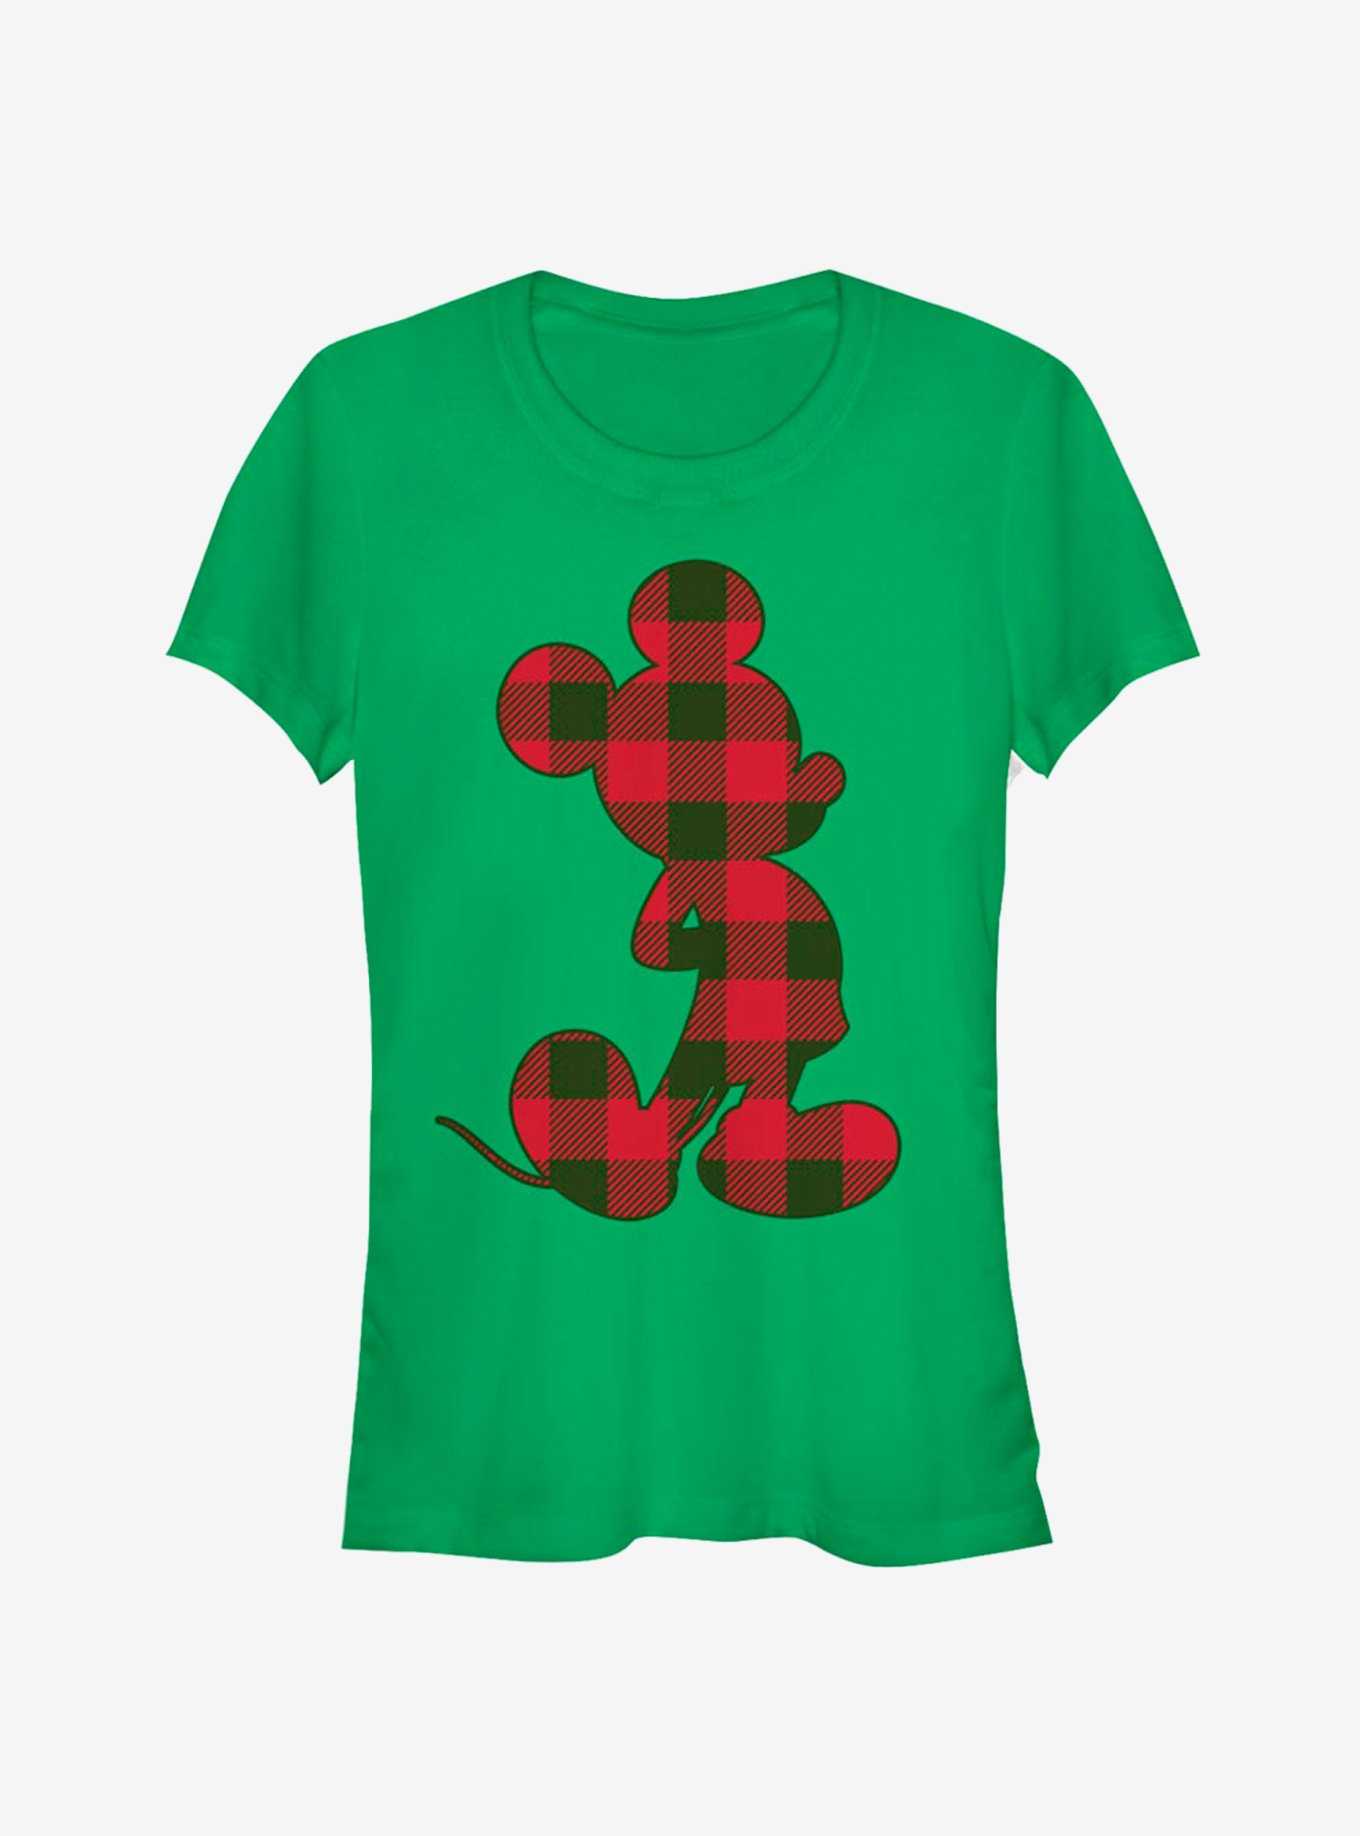 Disney Mickey Mouse Holiday Plaid Outline Classic Girls T-Shirt, , hi-res